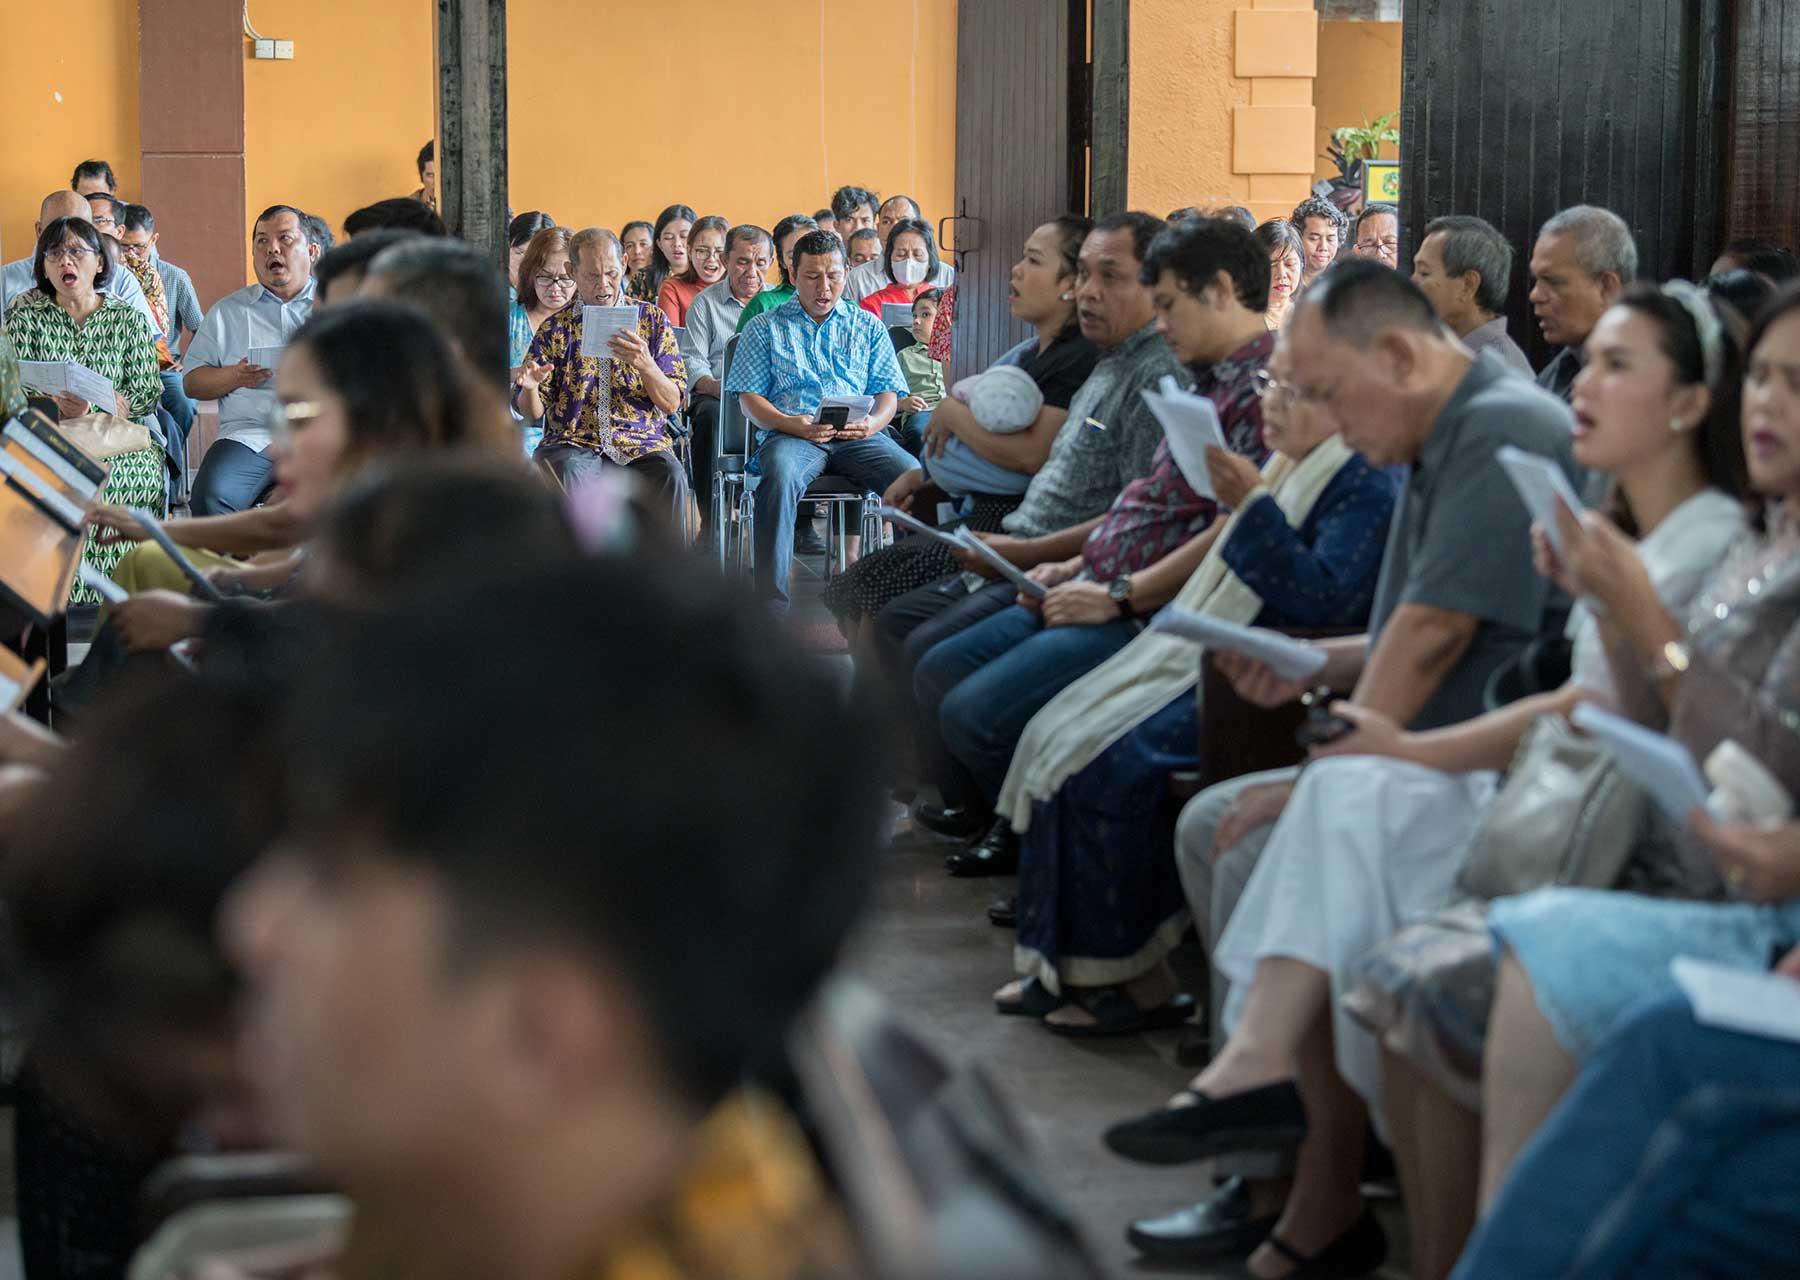 Congregants sing a hymn, including both those seated inside the church building and those in an overflow space provided just outside. Photo: LWF/Albin Hillert